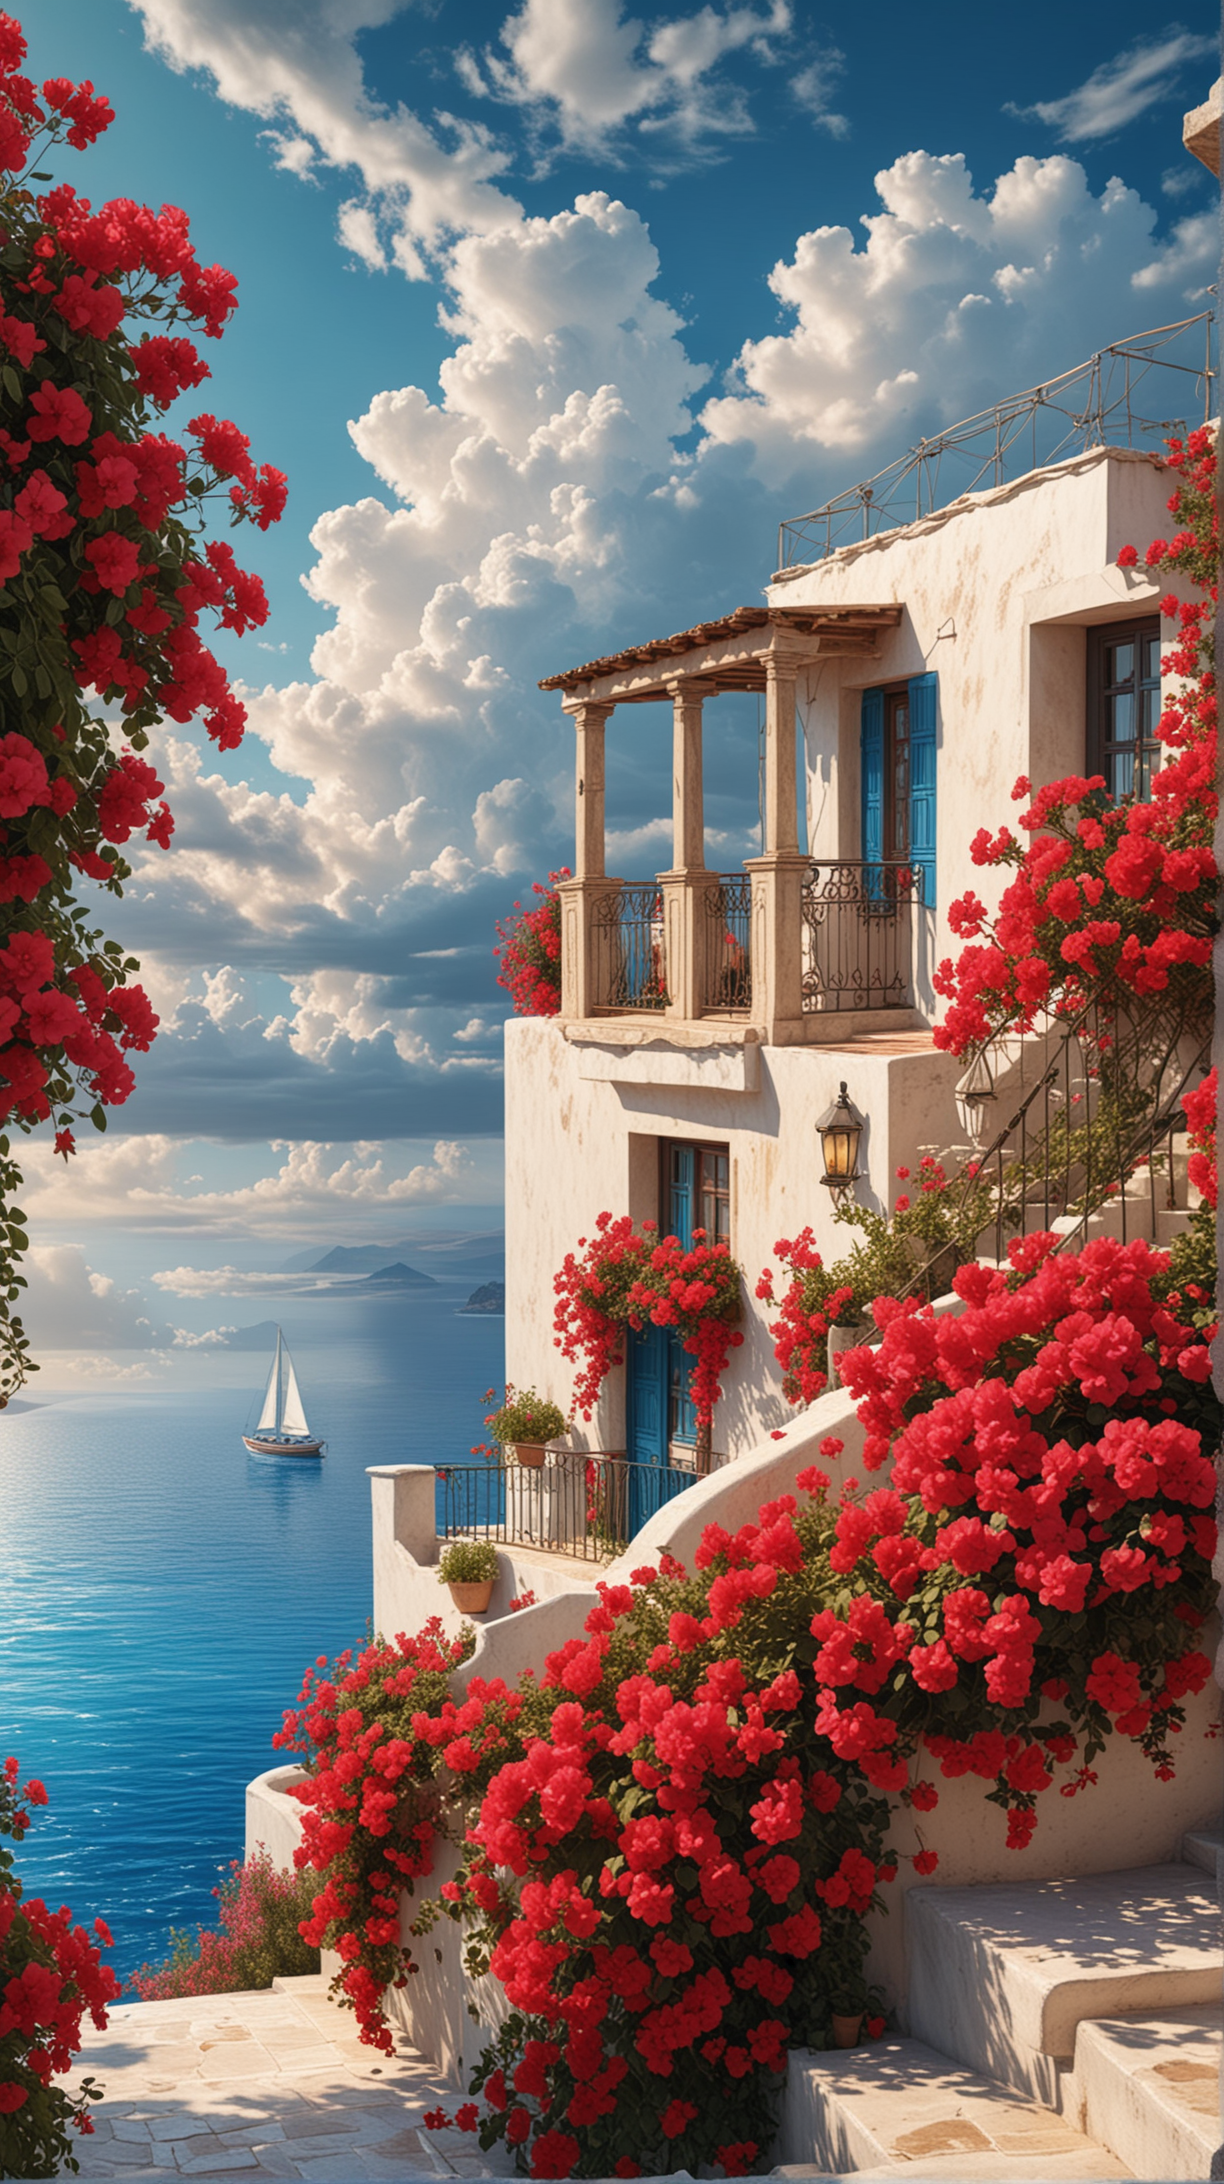 Majestic Greek Style House Overlooking Seascape with Red Bougainvillea Flowers and Sailboat